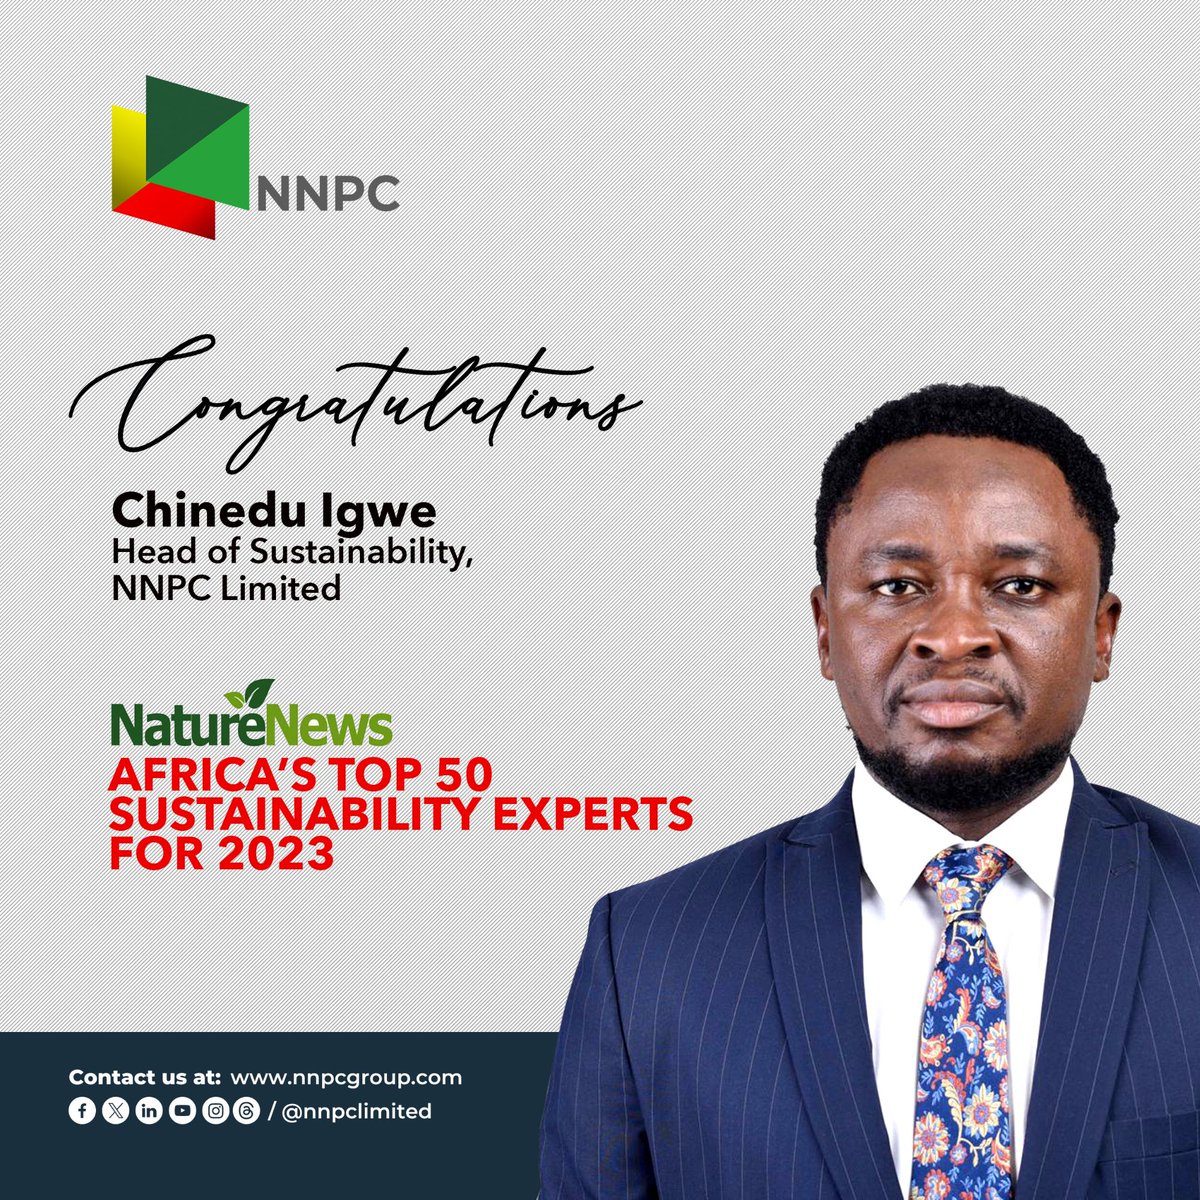 We congratulate Chinedu Igwe, Head, Sustainability, NNPC Limited, on making the NatureNews Africa maiden list of Africa’s Top 50 Sustainability Experts for 2023.

At NNPC Limited, our values are Integrity, Excellence, and Sustainability, and we are excited that Chinedu has…